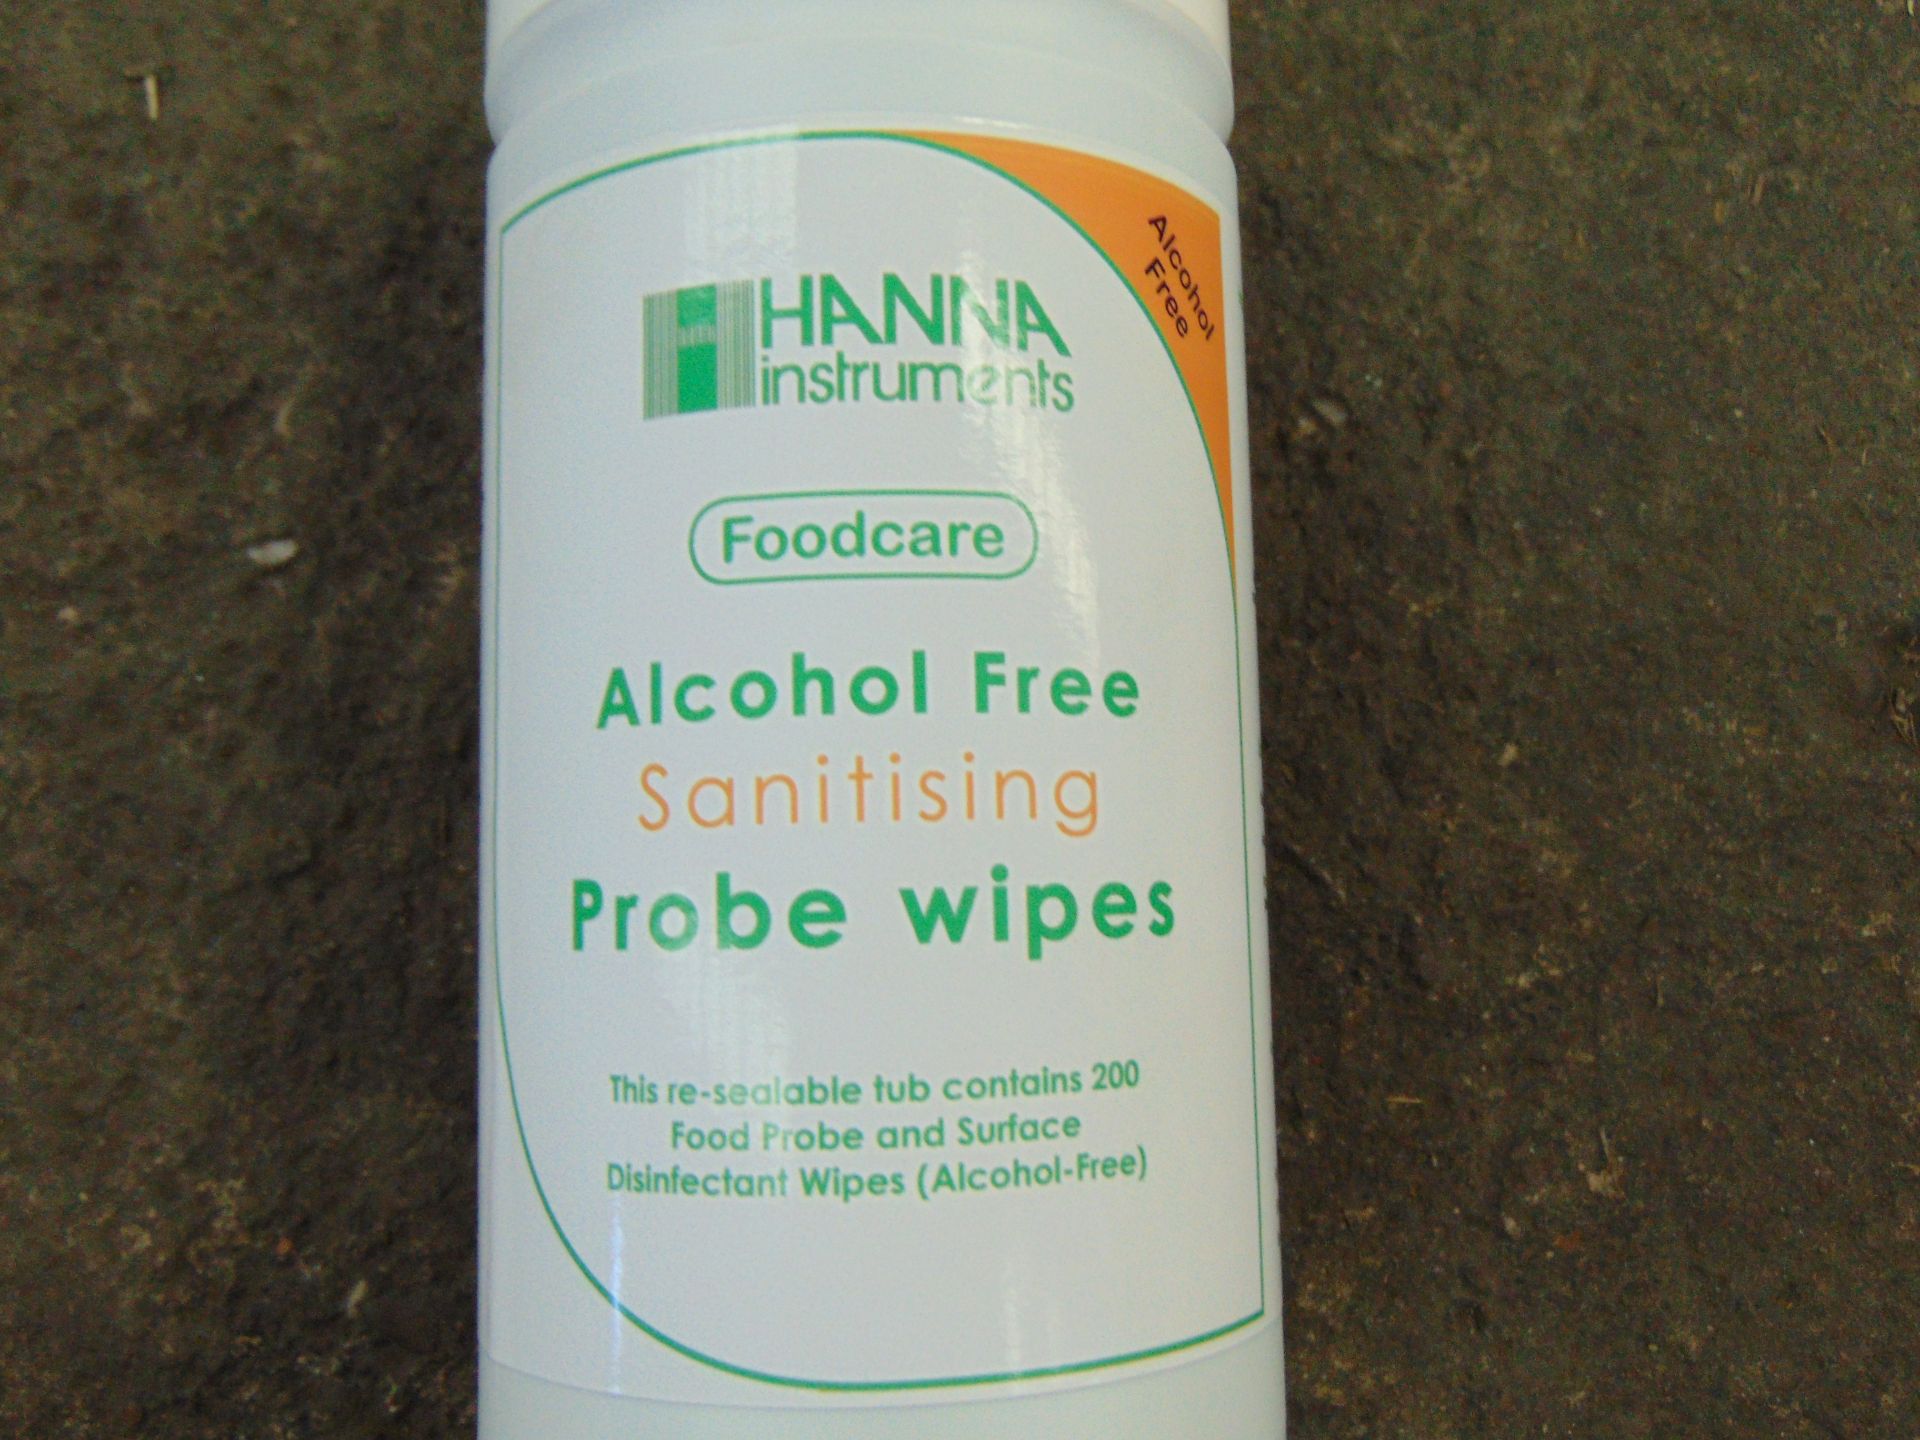 30 x Alcohol Free Sanitising Wipe Re-Sealable Tubs - Image 3 of 3